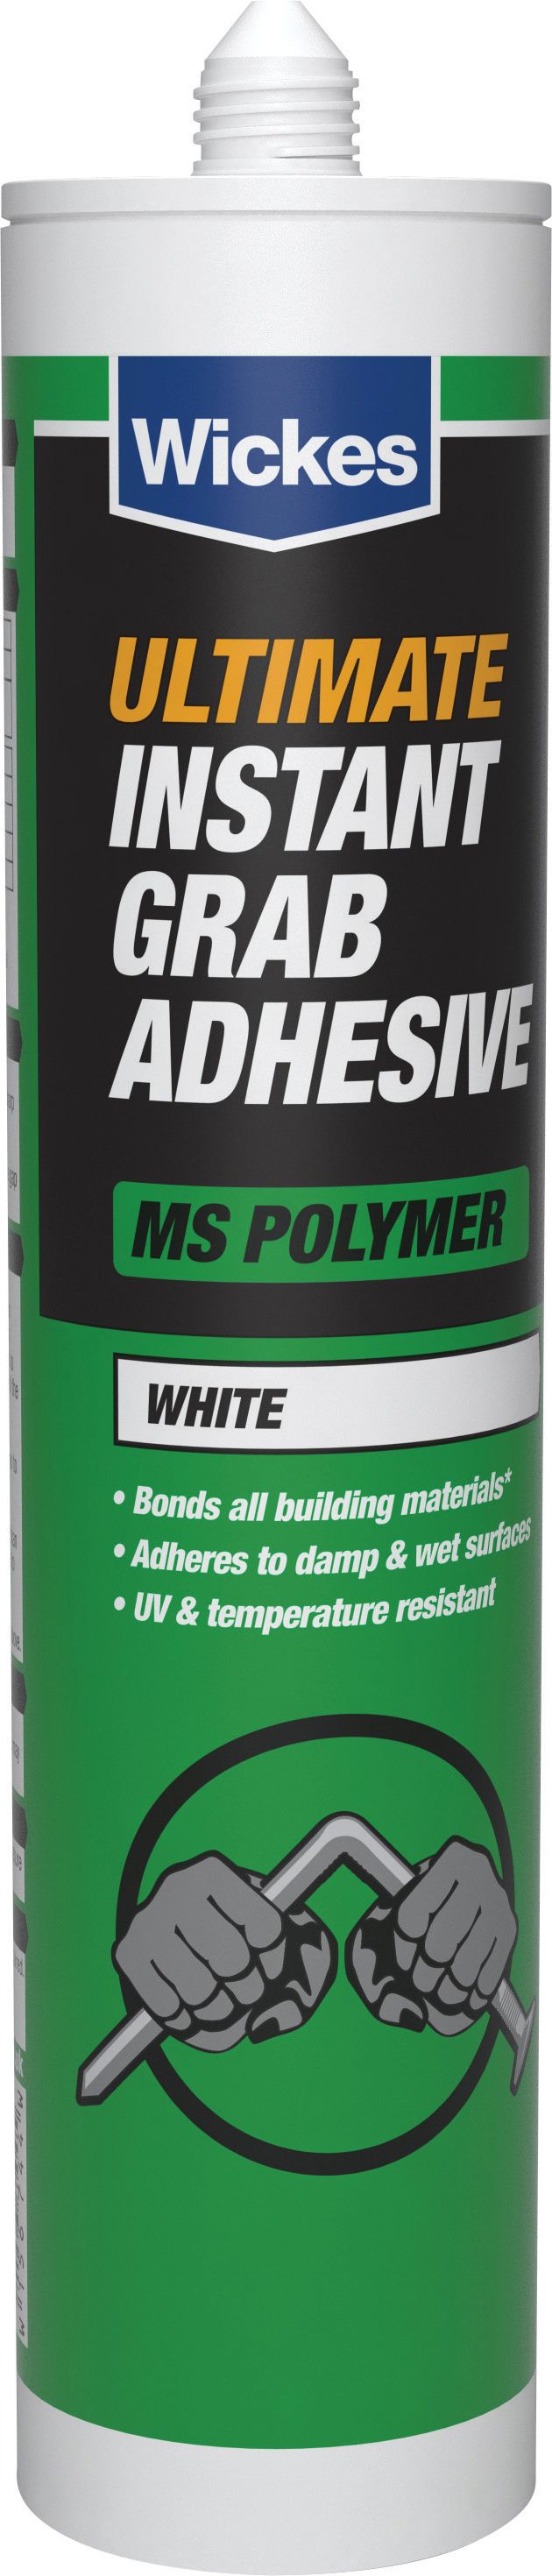 Image of Wickes Ultimate Instant Grab Adhesive - White - 290ml